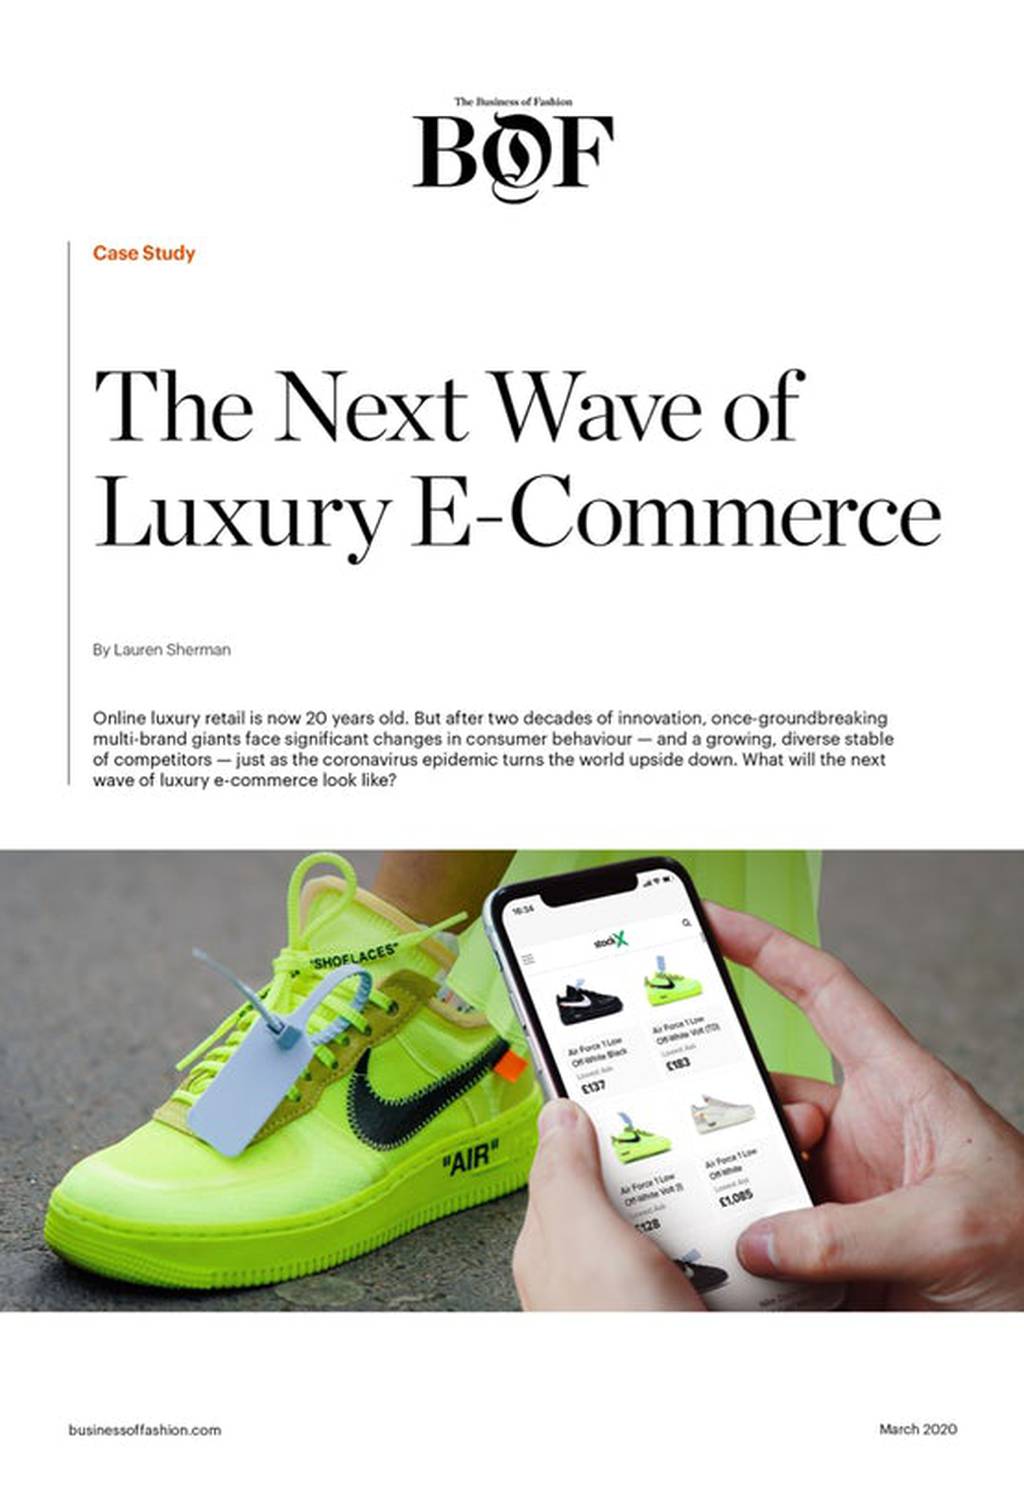 The Next Wave of Luxury E-Commerce